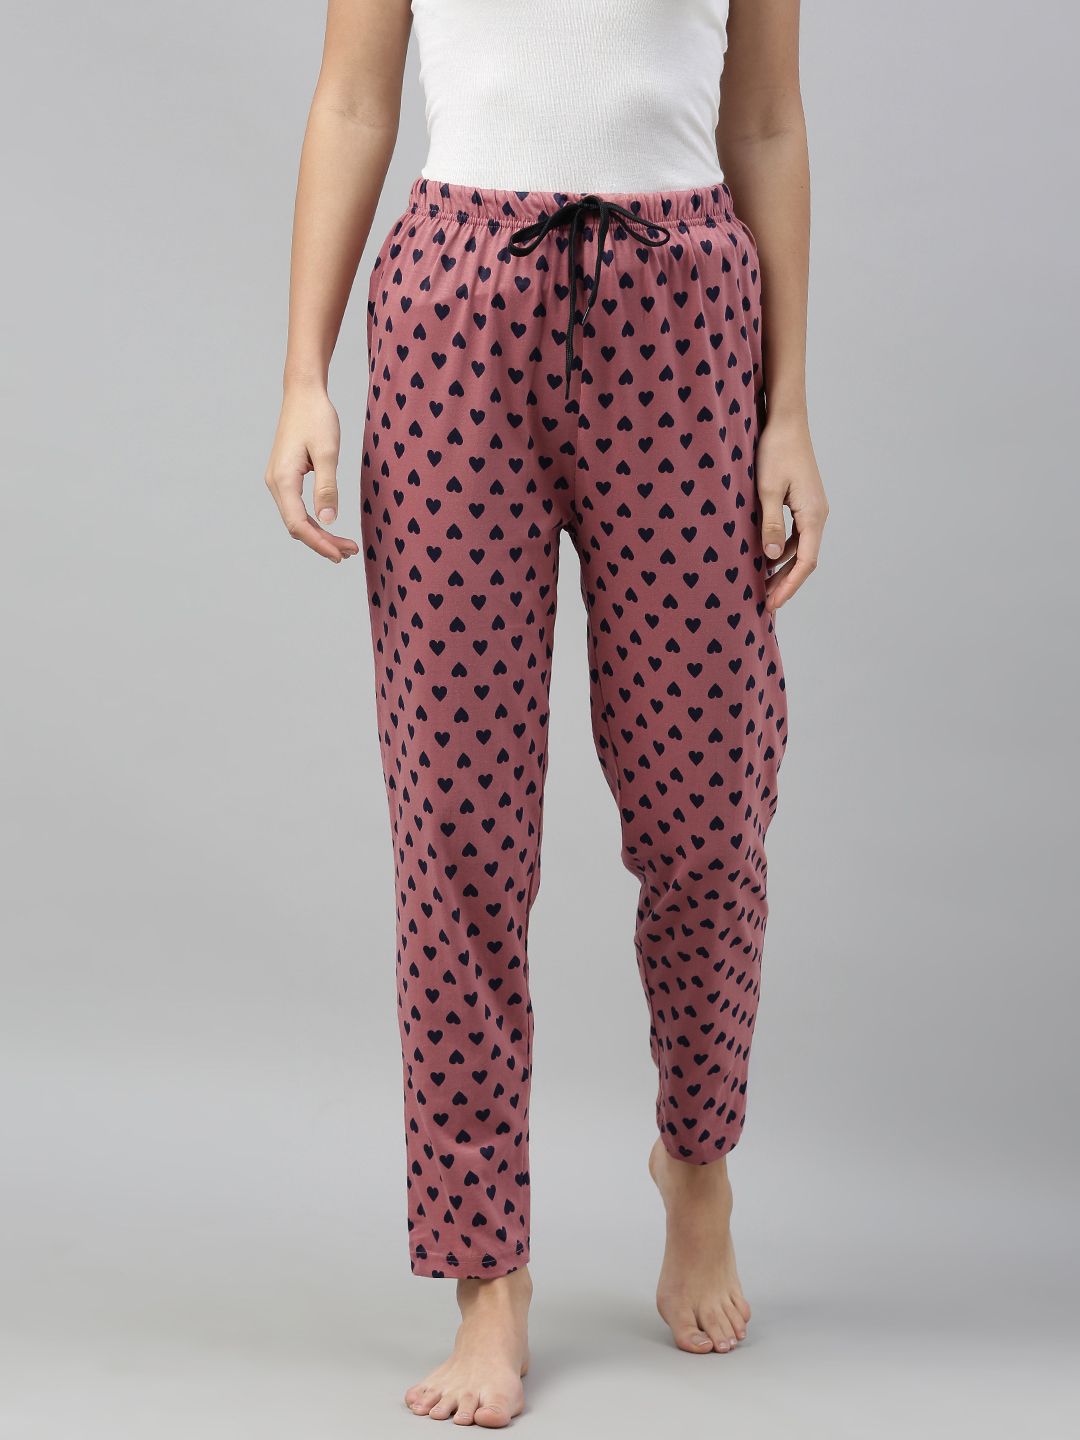 QUARANTINE Woman's Pink and Purple Printed Lounge Pants Price in India